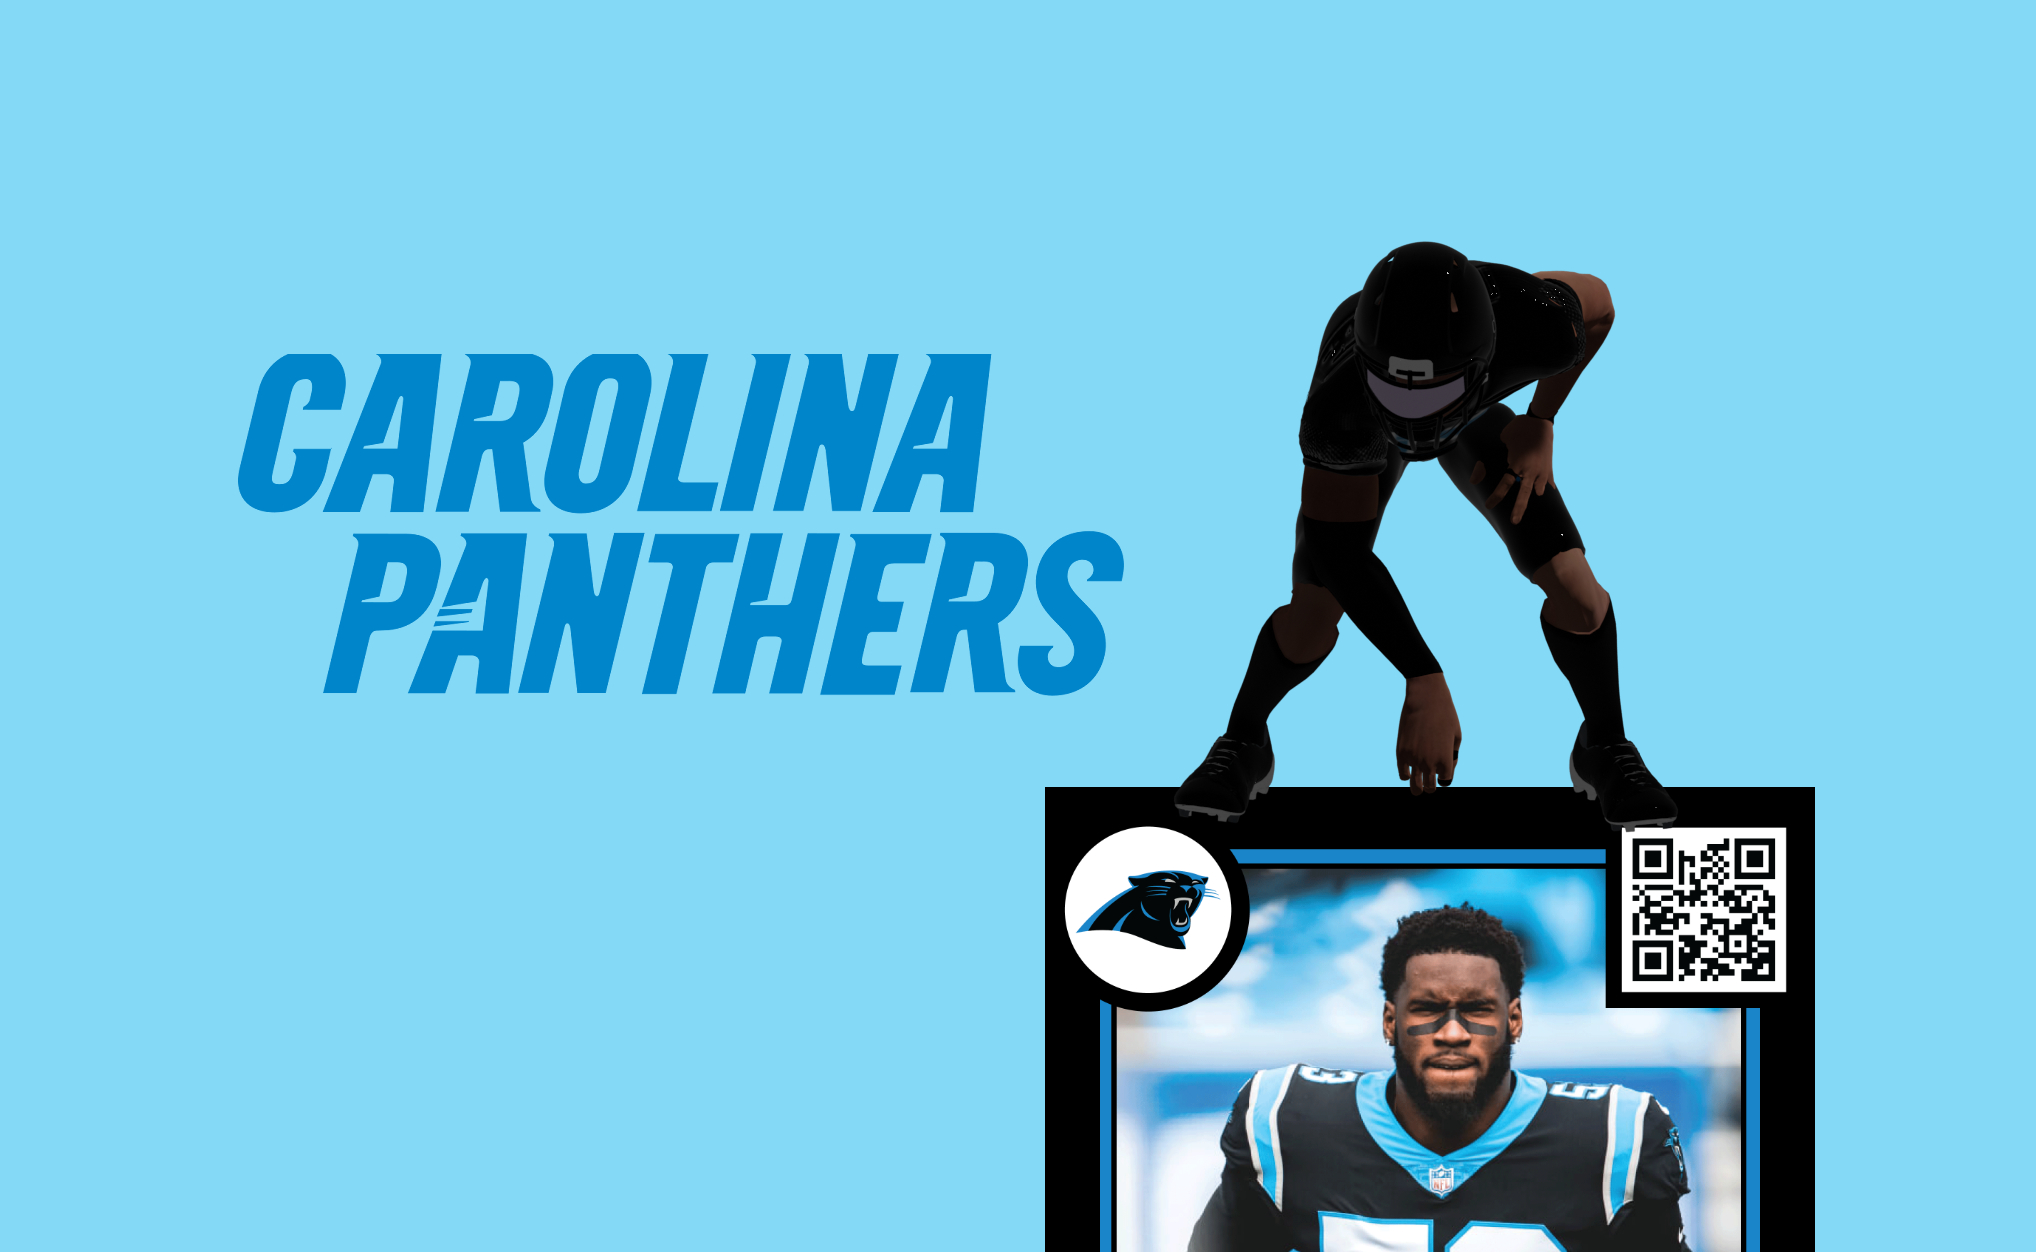 Card thumbnail for the cARds page. The image features the Carolina Panthers logo, a 3D model of a Panthers football player, and a mockup of a trading card.